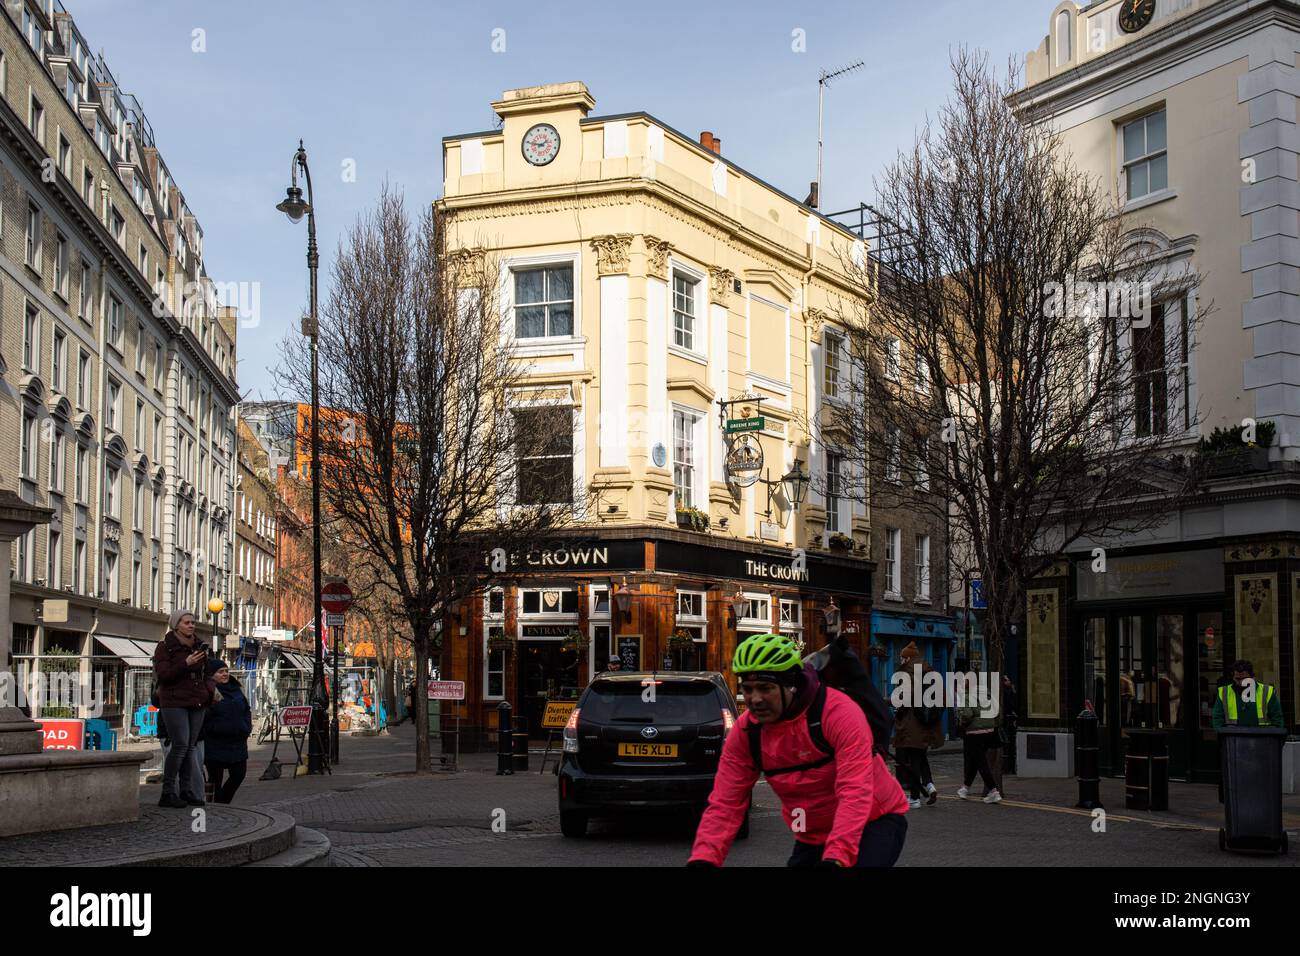 The Crown pub in Seven Dials district of London, England Stock Photo